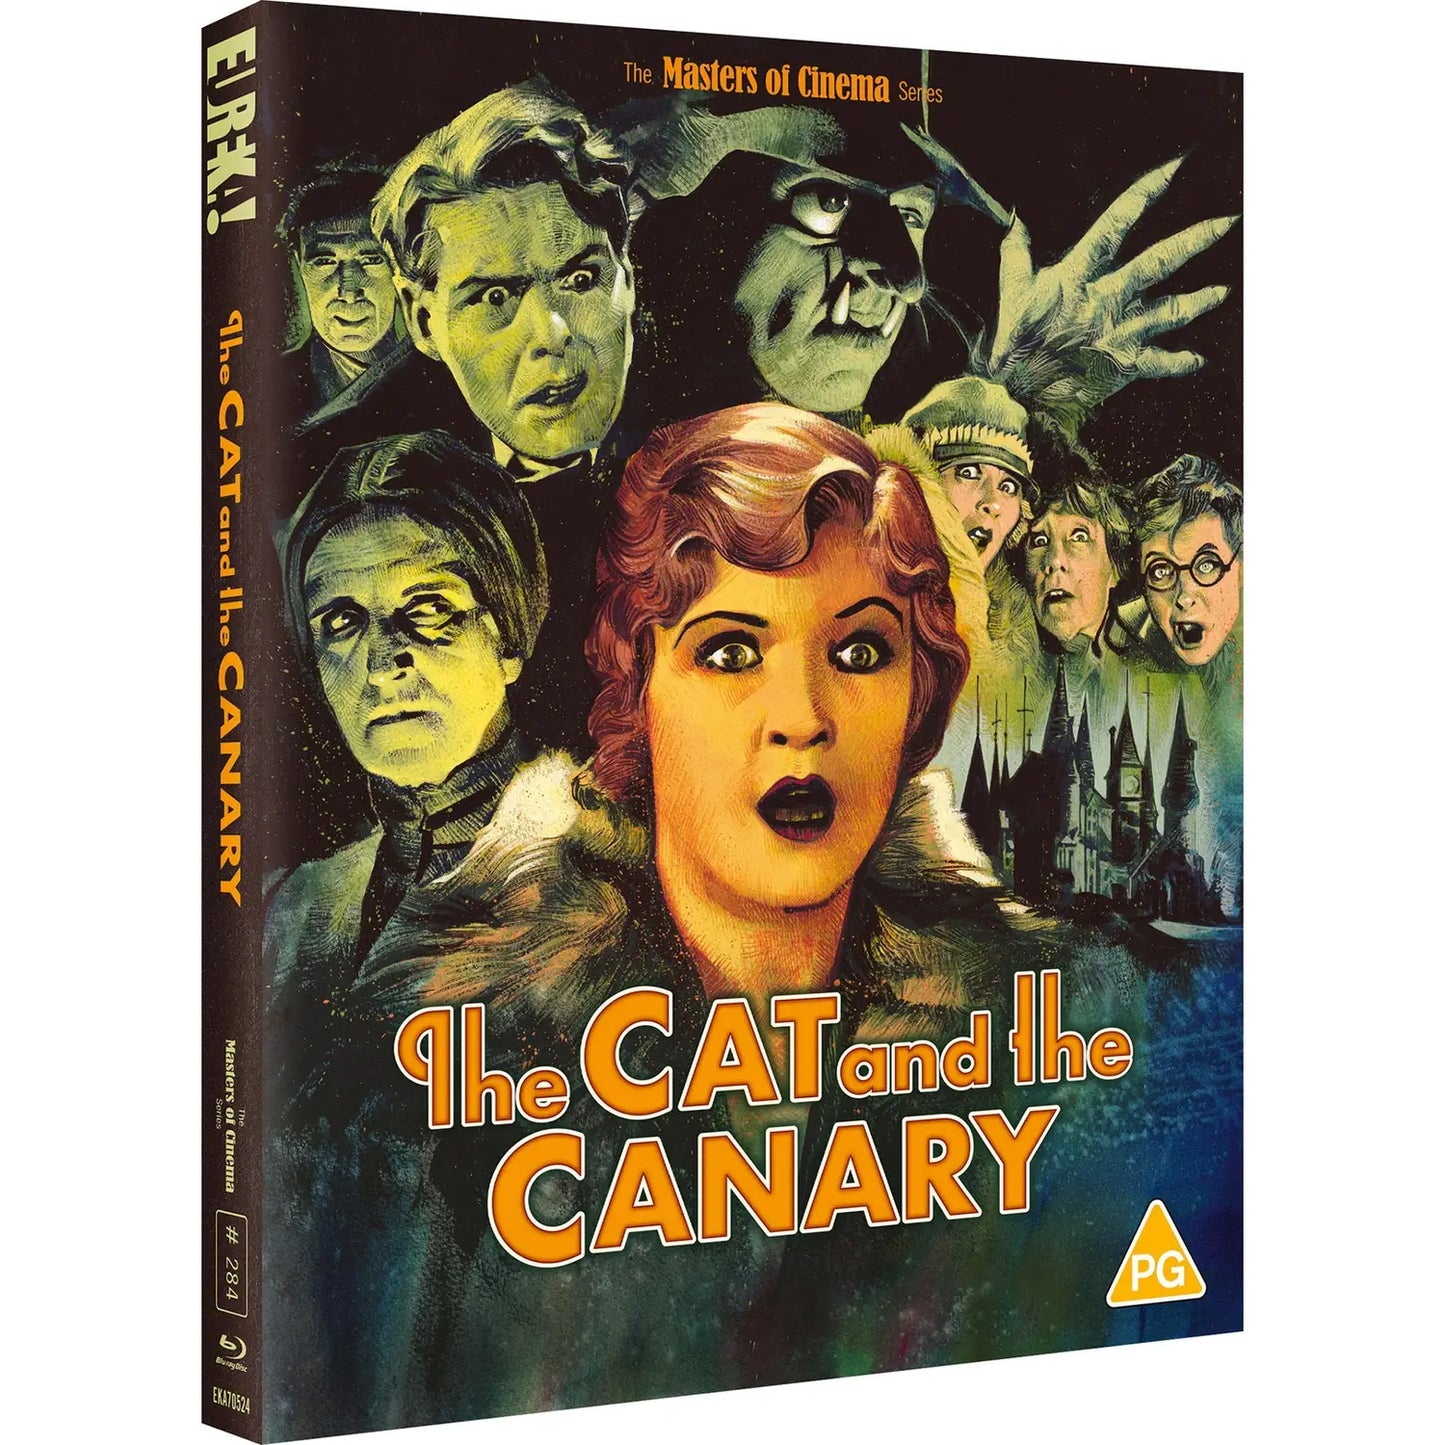 The Cat and the Canary Limited Edition Eureka Video Blu-Ray [PRE-ORDER] [SLIPCOVER]